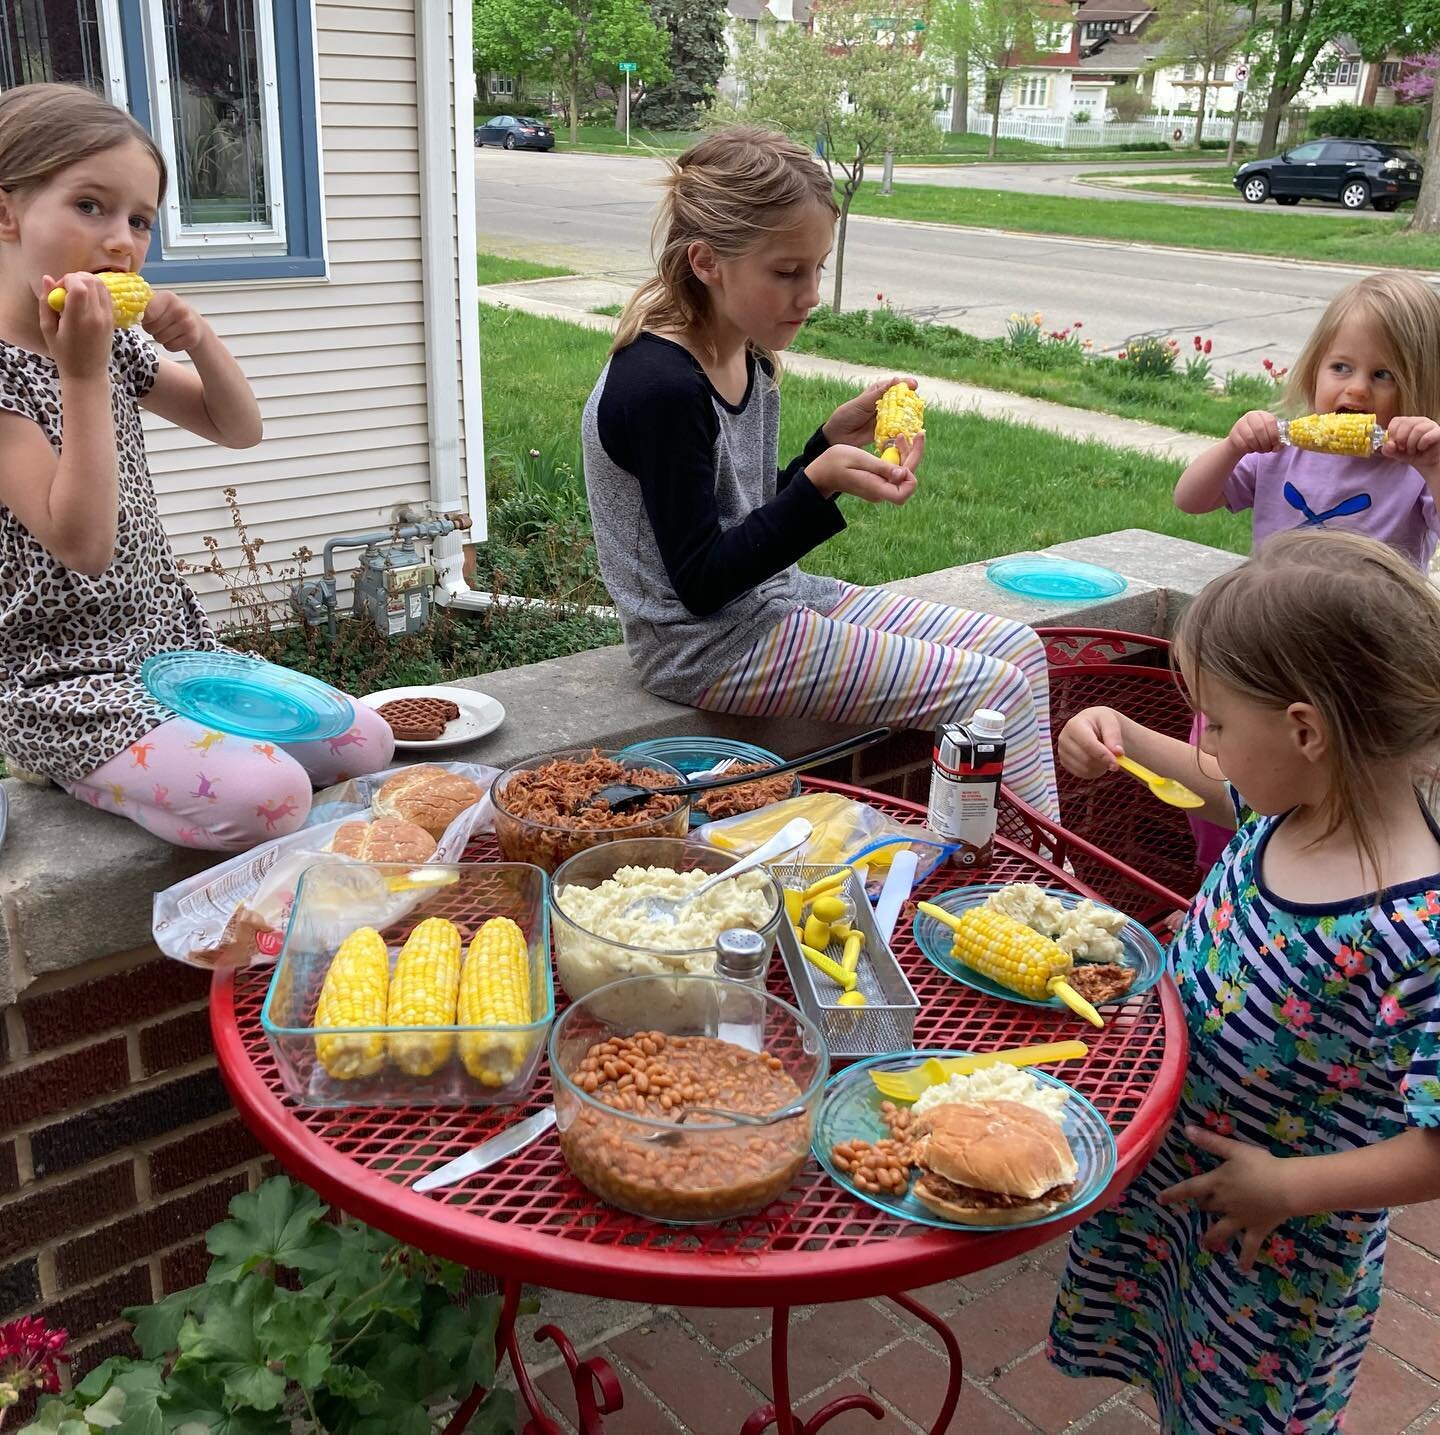 Everything about parenting is easier in the summer. The house is so much cleaner with everyone outside most of the days, we eat as many meals as possible outside and although there&rsquo;s lots of fun places to go and things to see we can also have s